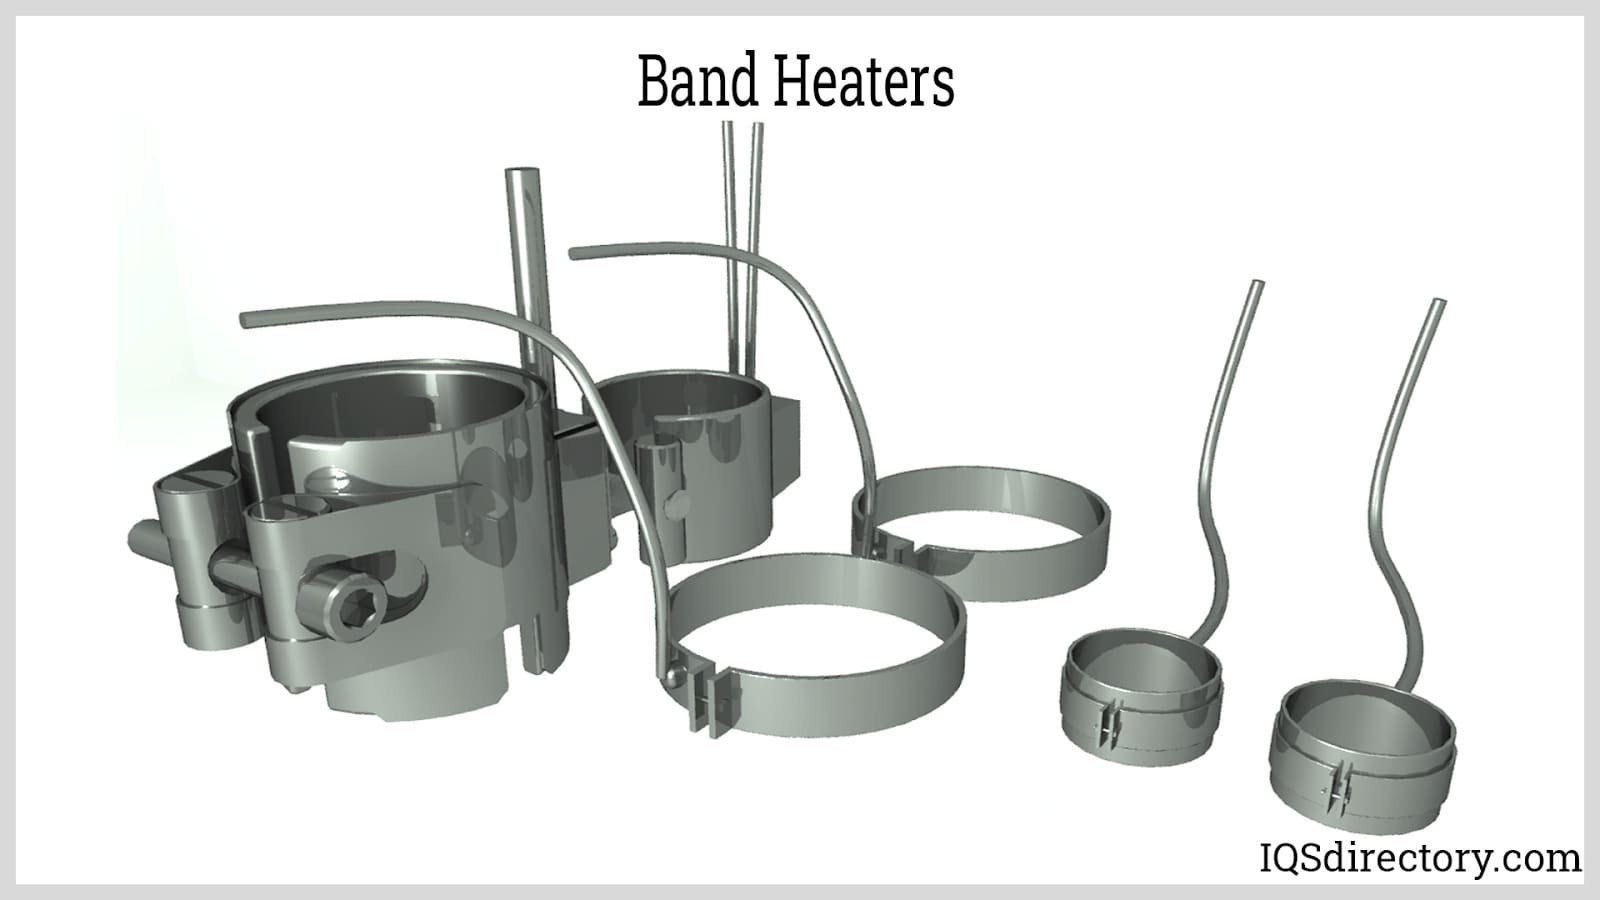 Why Purchase from a Band Heater Manufacturer